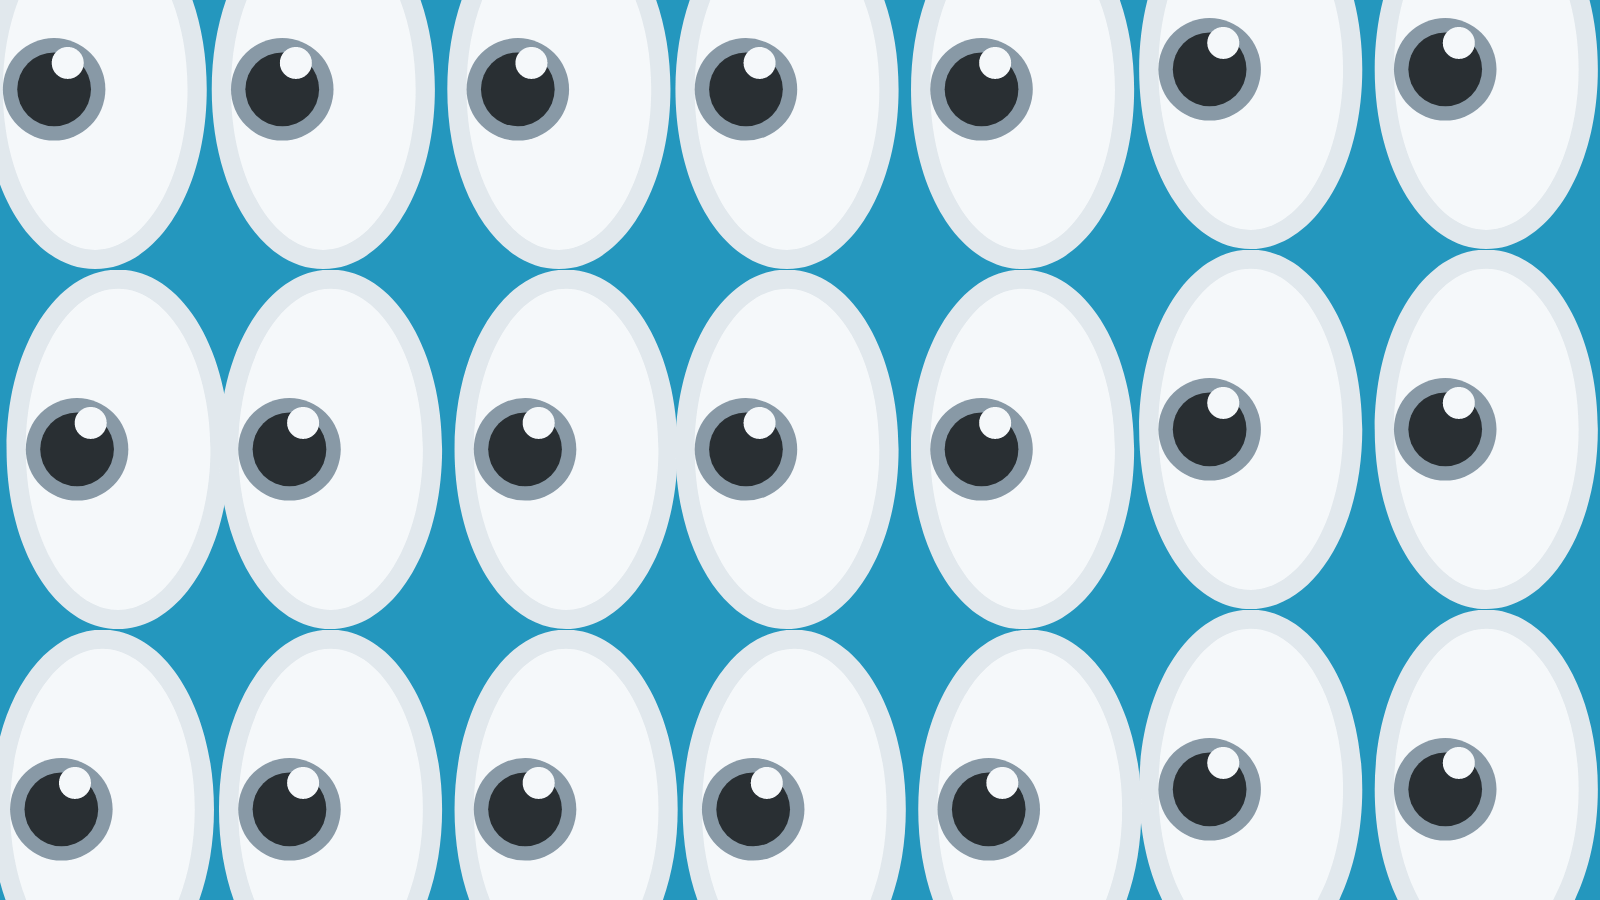 The eyeballs emoji repeating a bunch of times